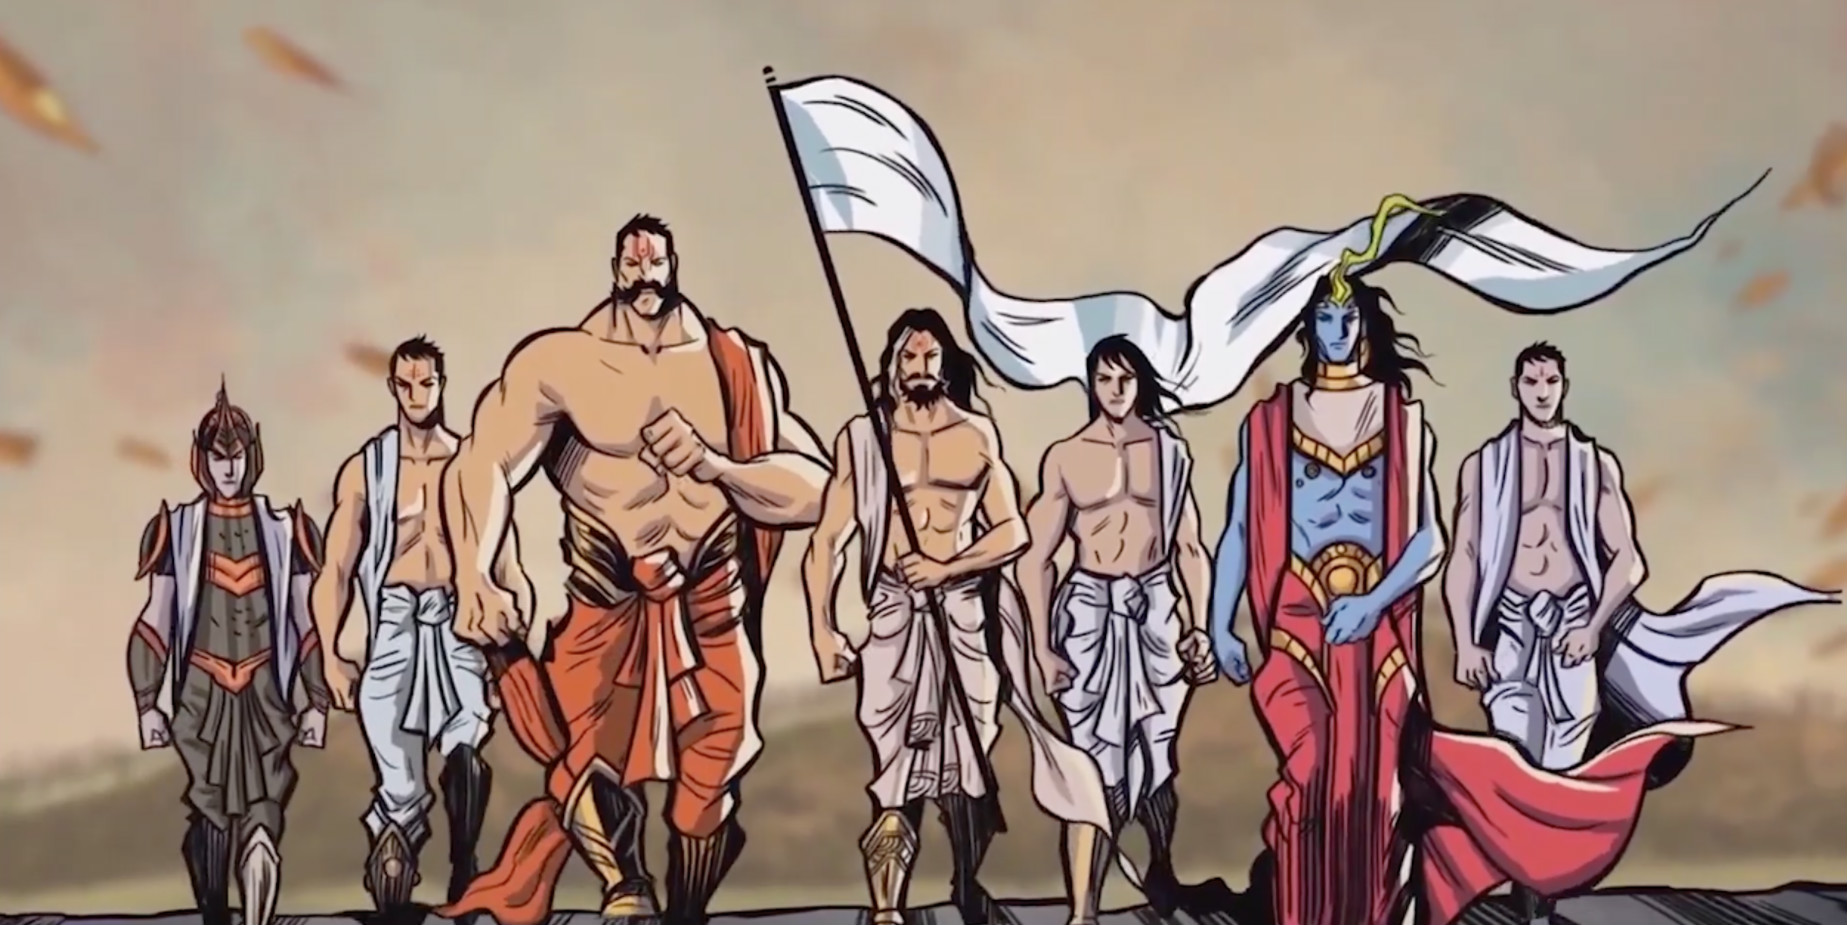 Swadesi Channel The Mahabharata On Animated Music Video For 'Jung' - Wild  City